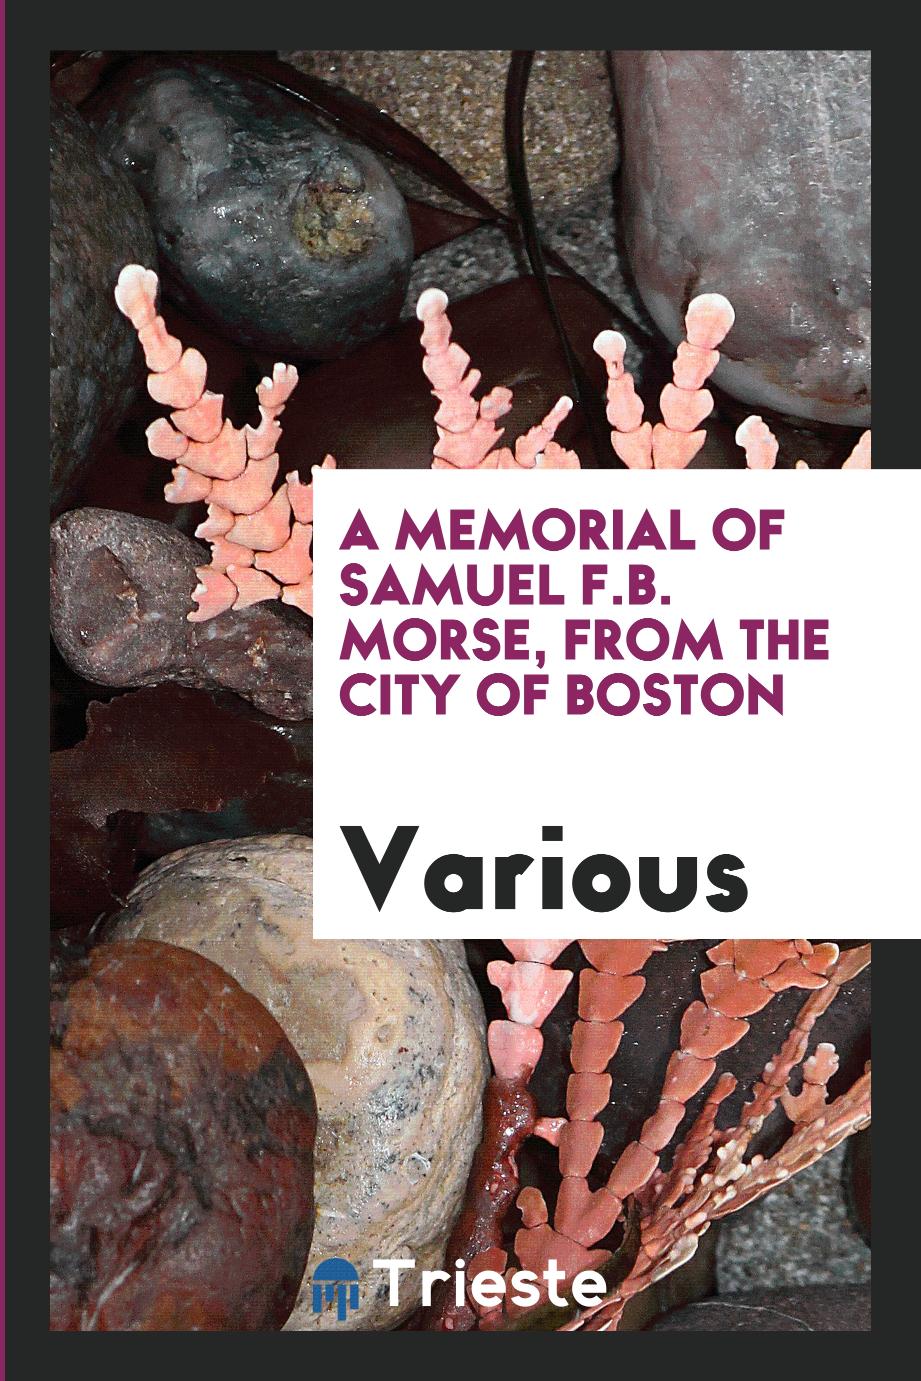 A Memorial of Samuel F.B. Morse, from the City of Boston